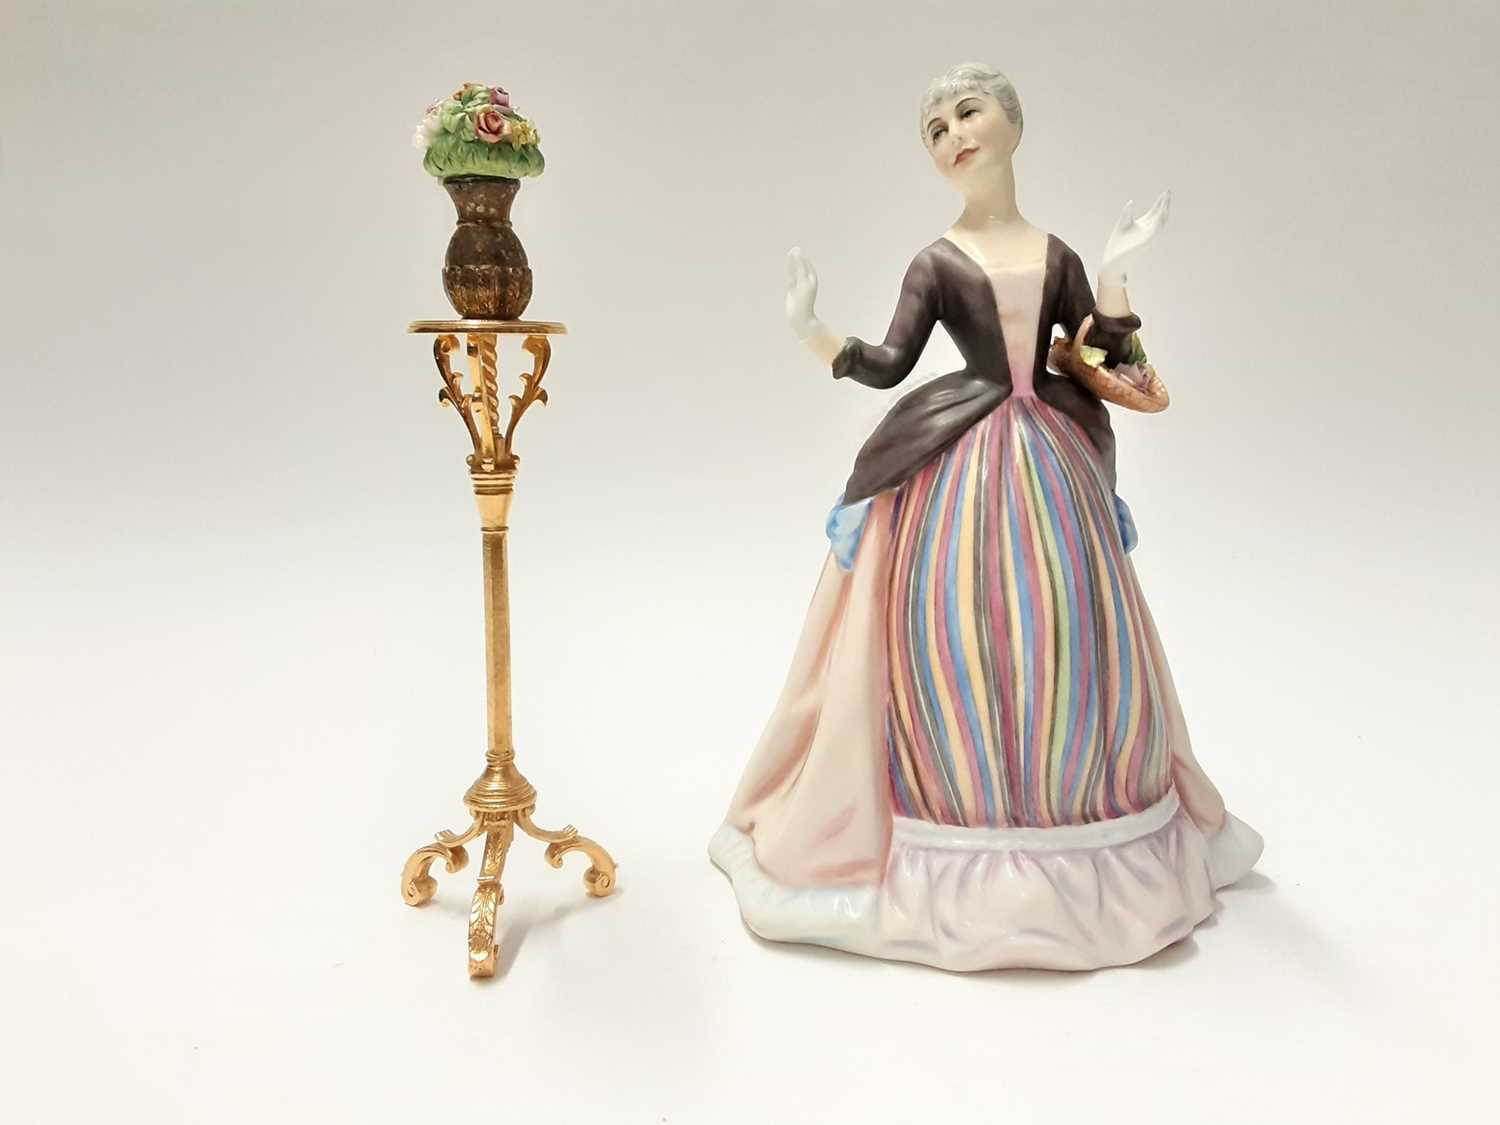 Lot 137 - Royal Doulton limited edition Gentle Arts figure - Flower Arranging HN3040 on plinth base, modelled by Don Brindley, number 429 of 750, boxed with certificate